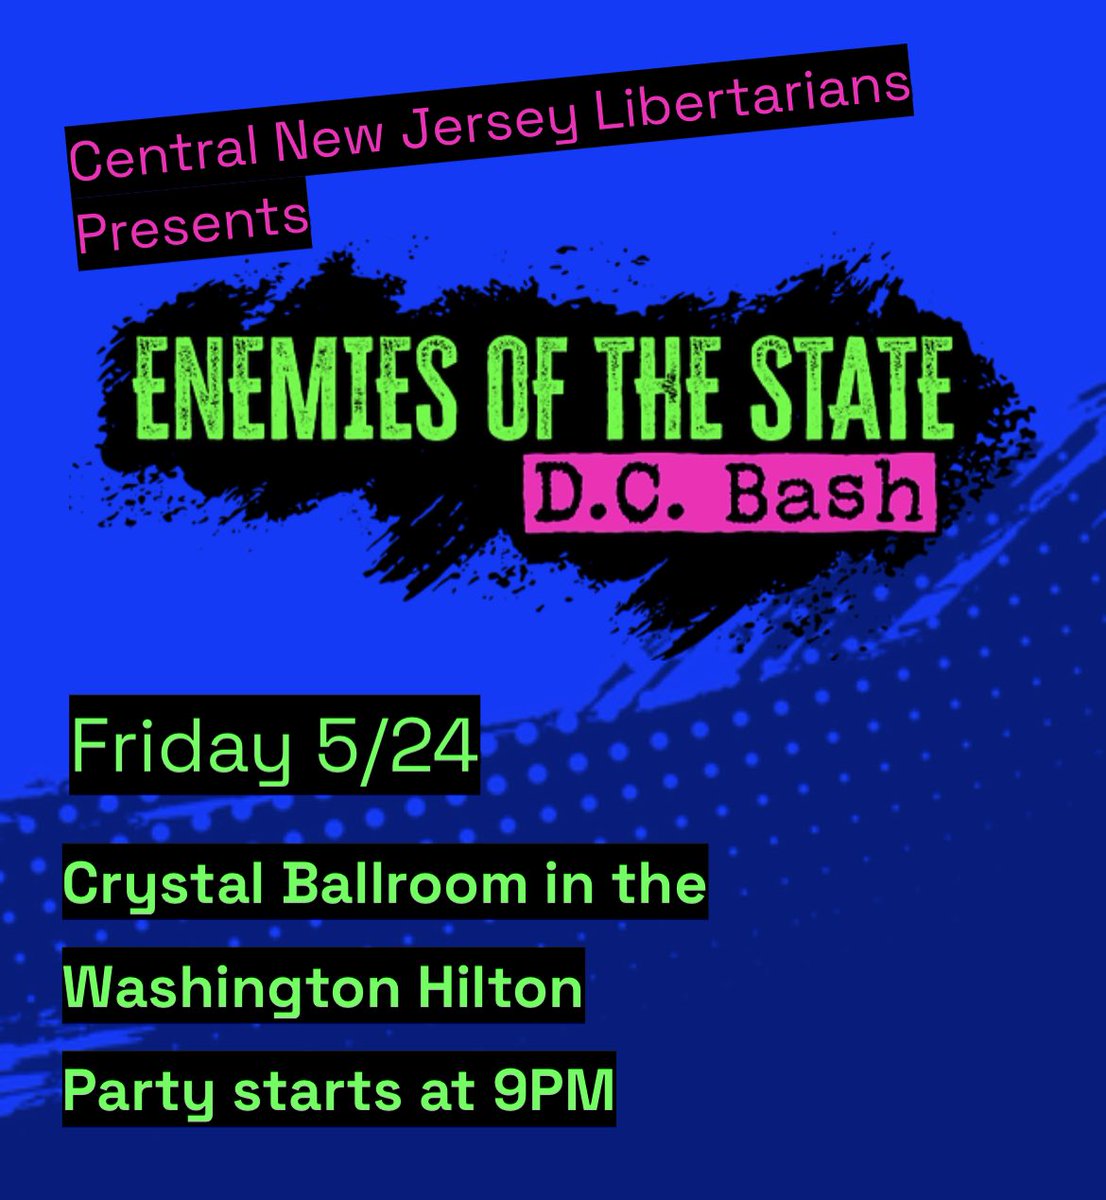 Enemies Of The State - D.C. Bash is on May 24th at the Crystal Ballroom in the Washington Hilton.  Party starts at 9pm.  Visit centralnjlp.org/enemiesofthest… for more info. 

#tatianacoin #tatianamoroz #enemiesofthestate #centralnewjerseylibertarians #washingtondc #libertarians